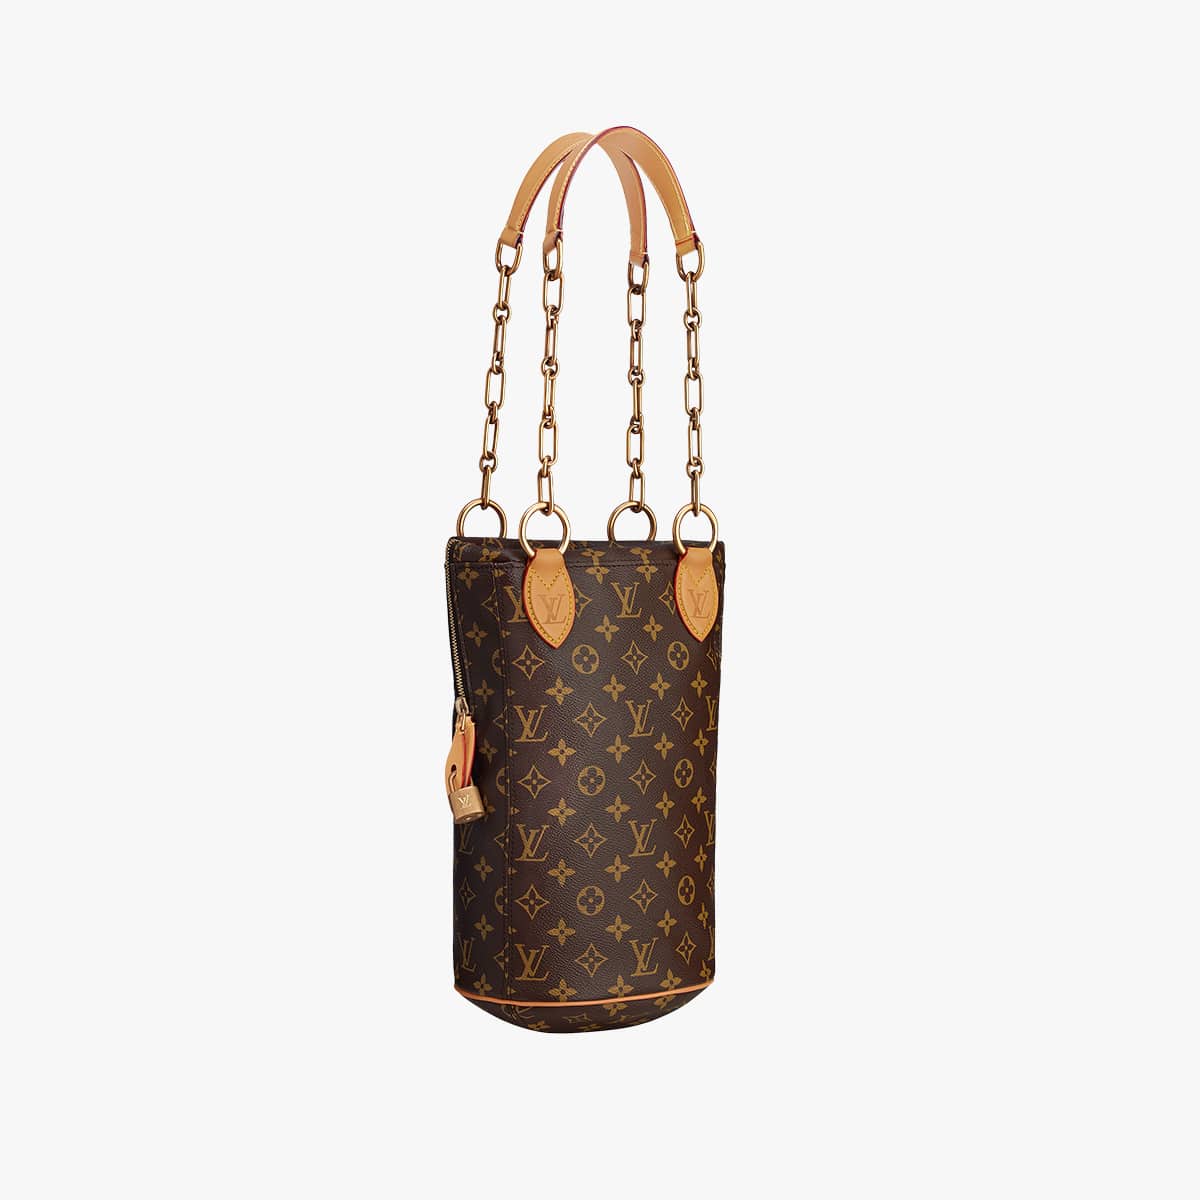 Karl Lagerfeld x Iconoclasts Collection Monogram Punching Bag